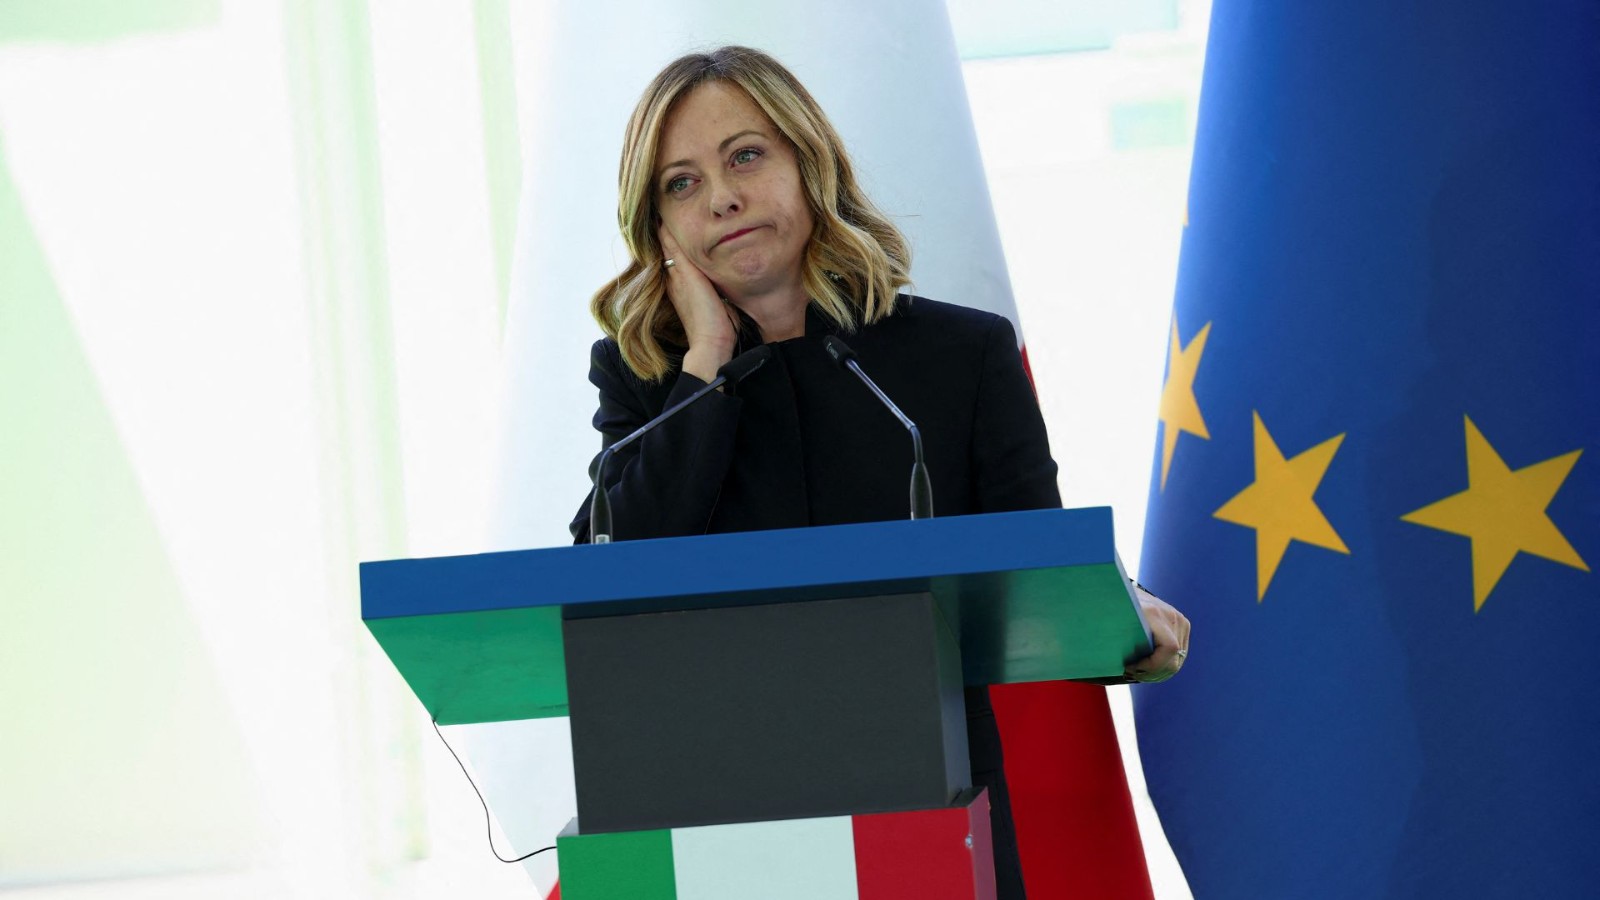 Italy's Prime Minister Giorgia Meloni looks on, as she visits the construction site of a migrant processing centre in Shengjin, Albania on Wednesday. /Florion Goga/Reuters